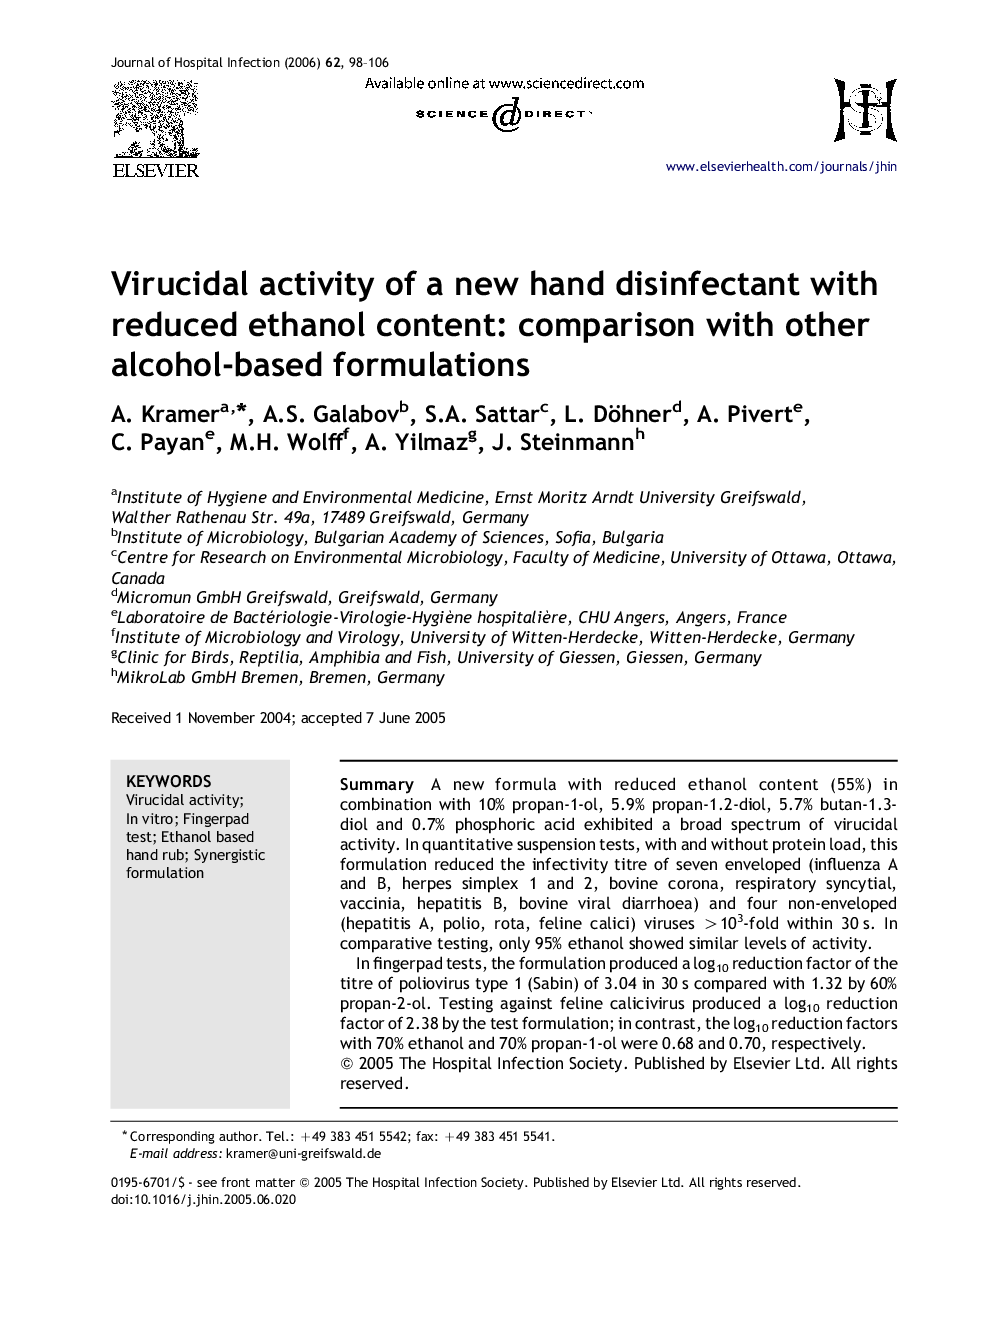 Virucidal activity of a new hand disinfectant with reduced ethanol content: comparison with other alcohol-based formulations